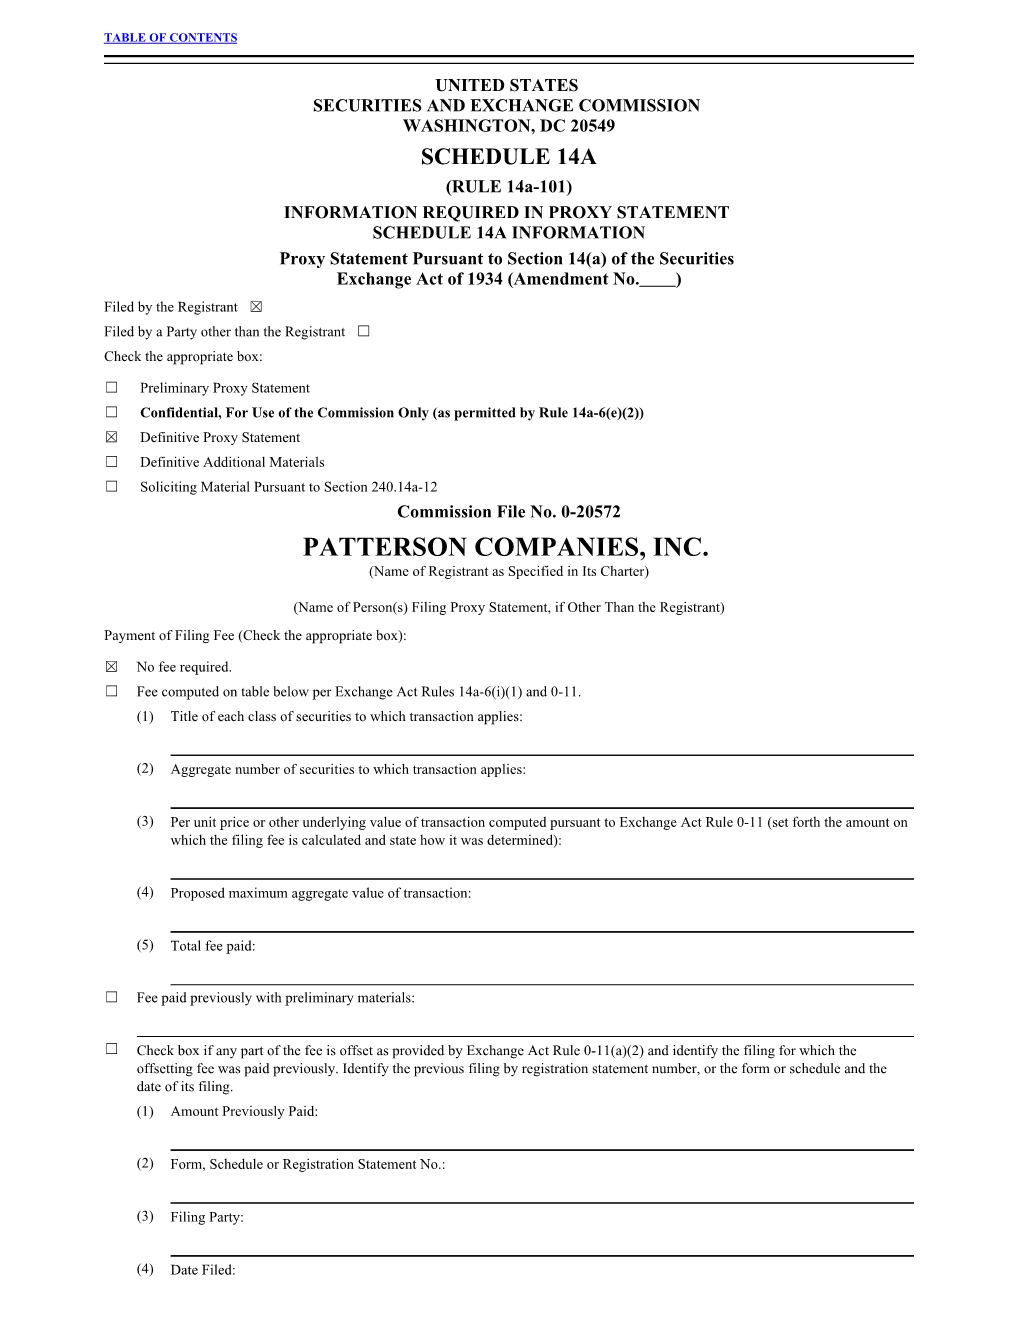 PATTERSON COMPANIES, INC. (Name of Registrant As Specified in Its Charter)